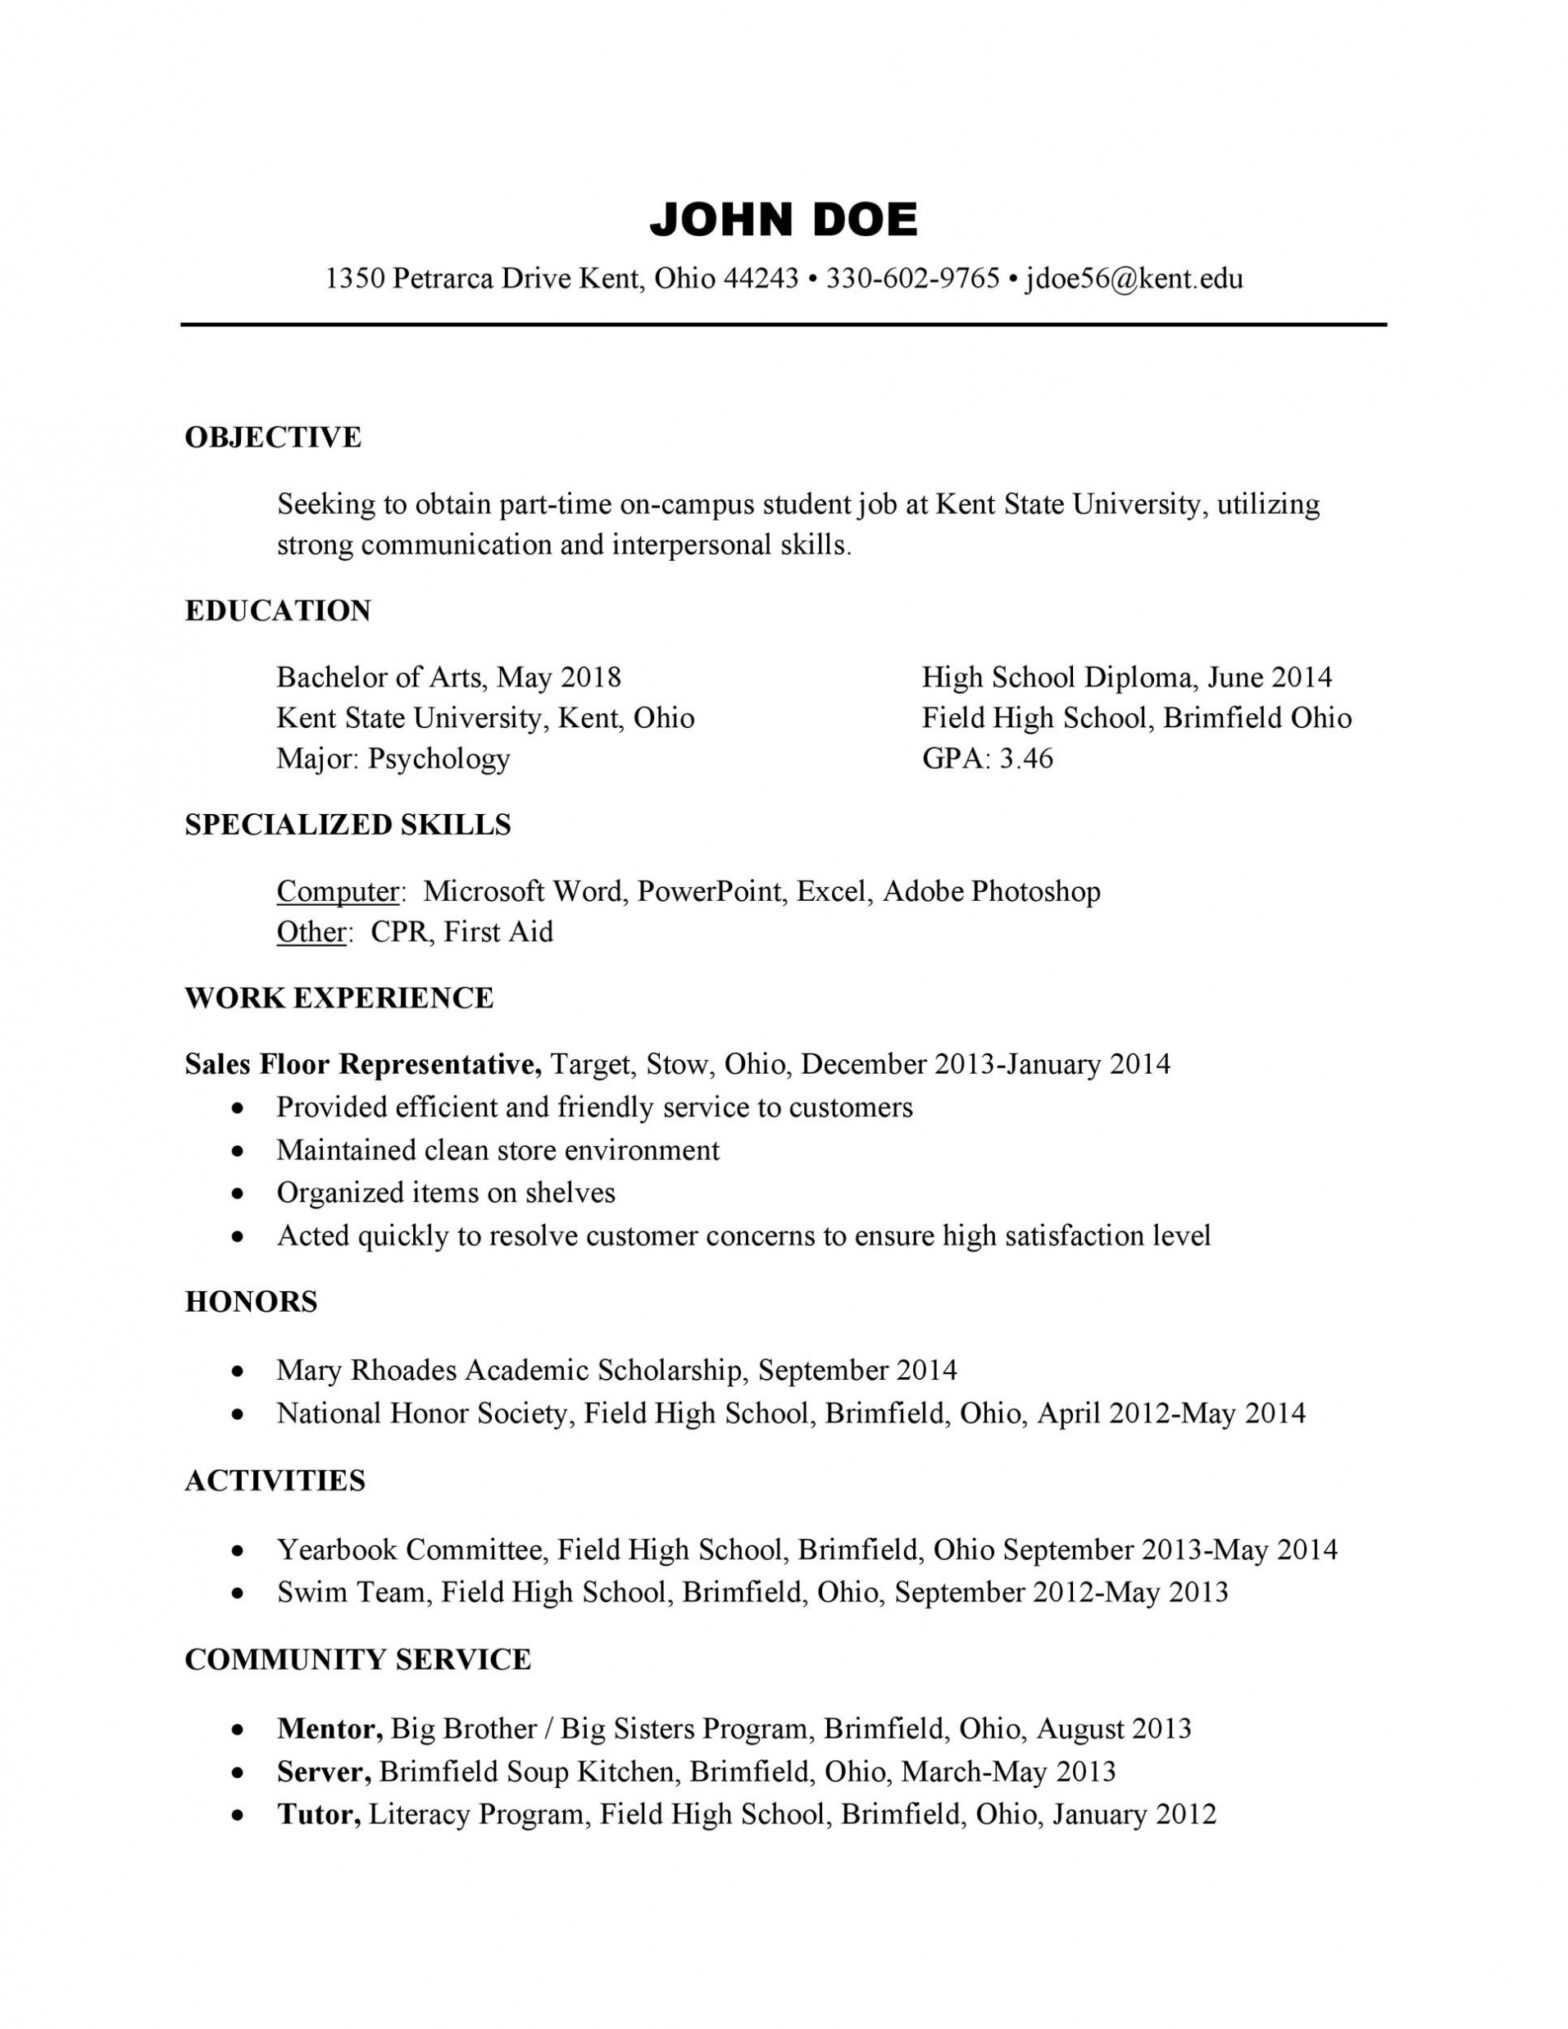 50 College Student Resume Templates (&amp; Format) ᐅ Templatelab throughout College Student Resume Template Microsoft Word